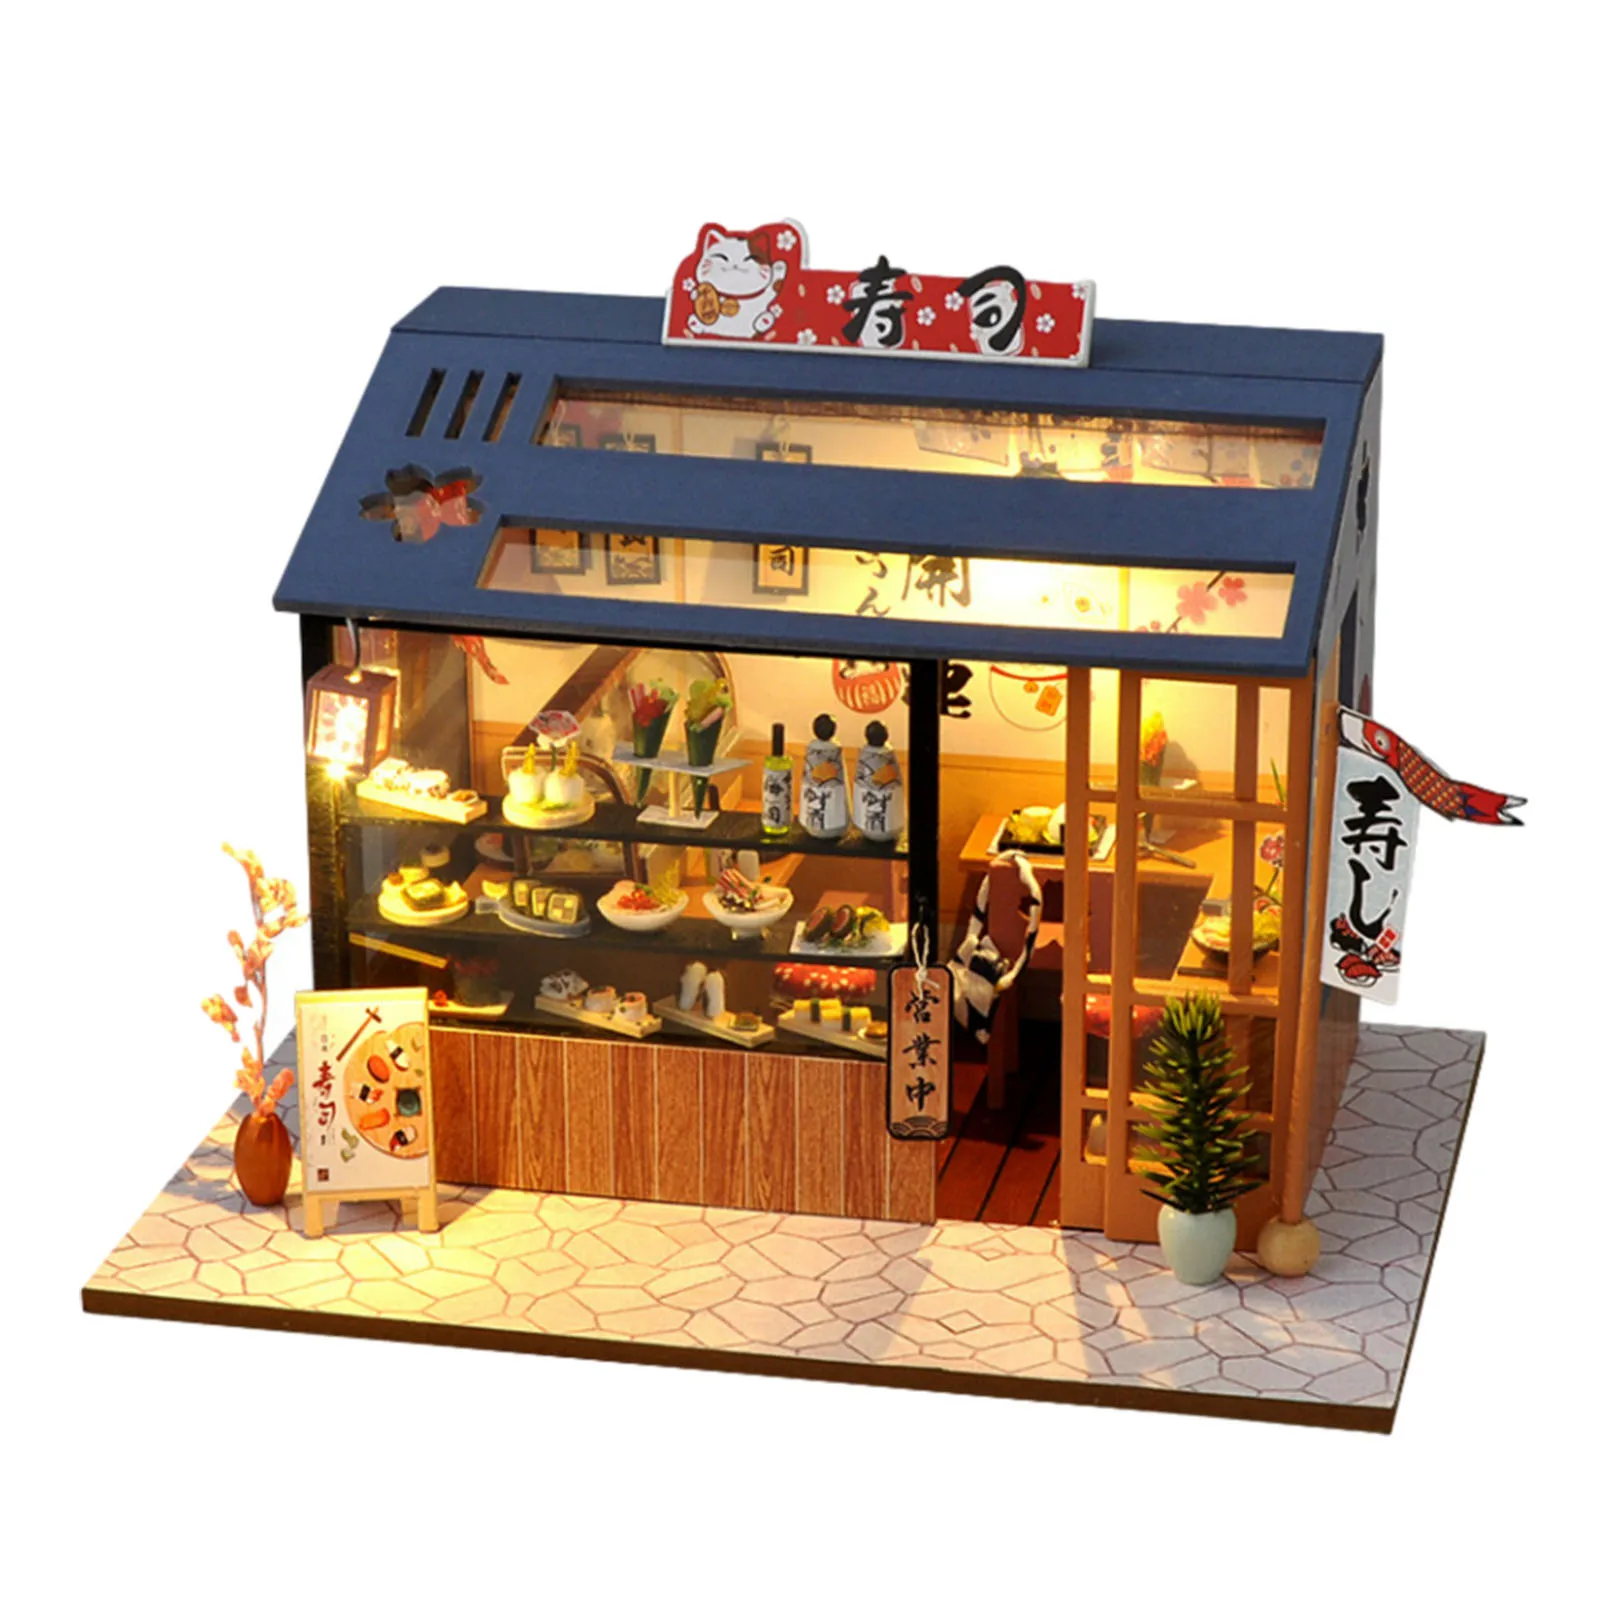 Japanese Doll House Miniature DIY Dollhouse Simulation Sushi Shop Model Toy Wooden Furnitures Children Toy Dollhouse Accessories maisto new 1 18 ducati multistrada alloy diecast motorcycle model workable shork absorber toy for children gifts toy collection